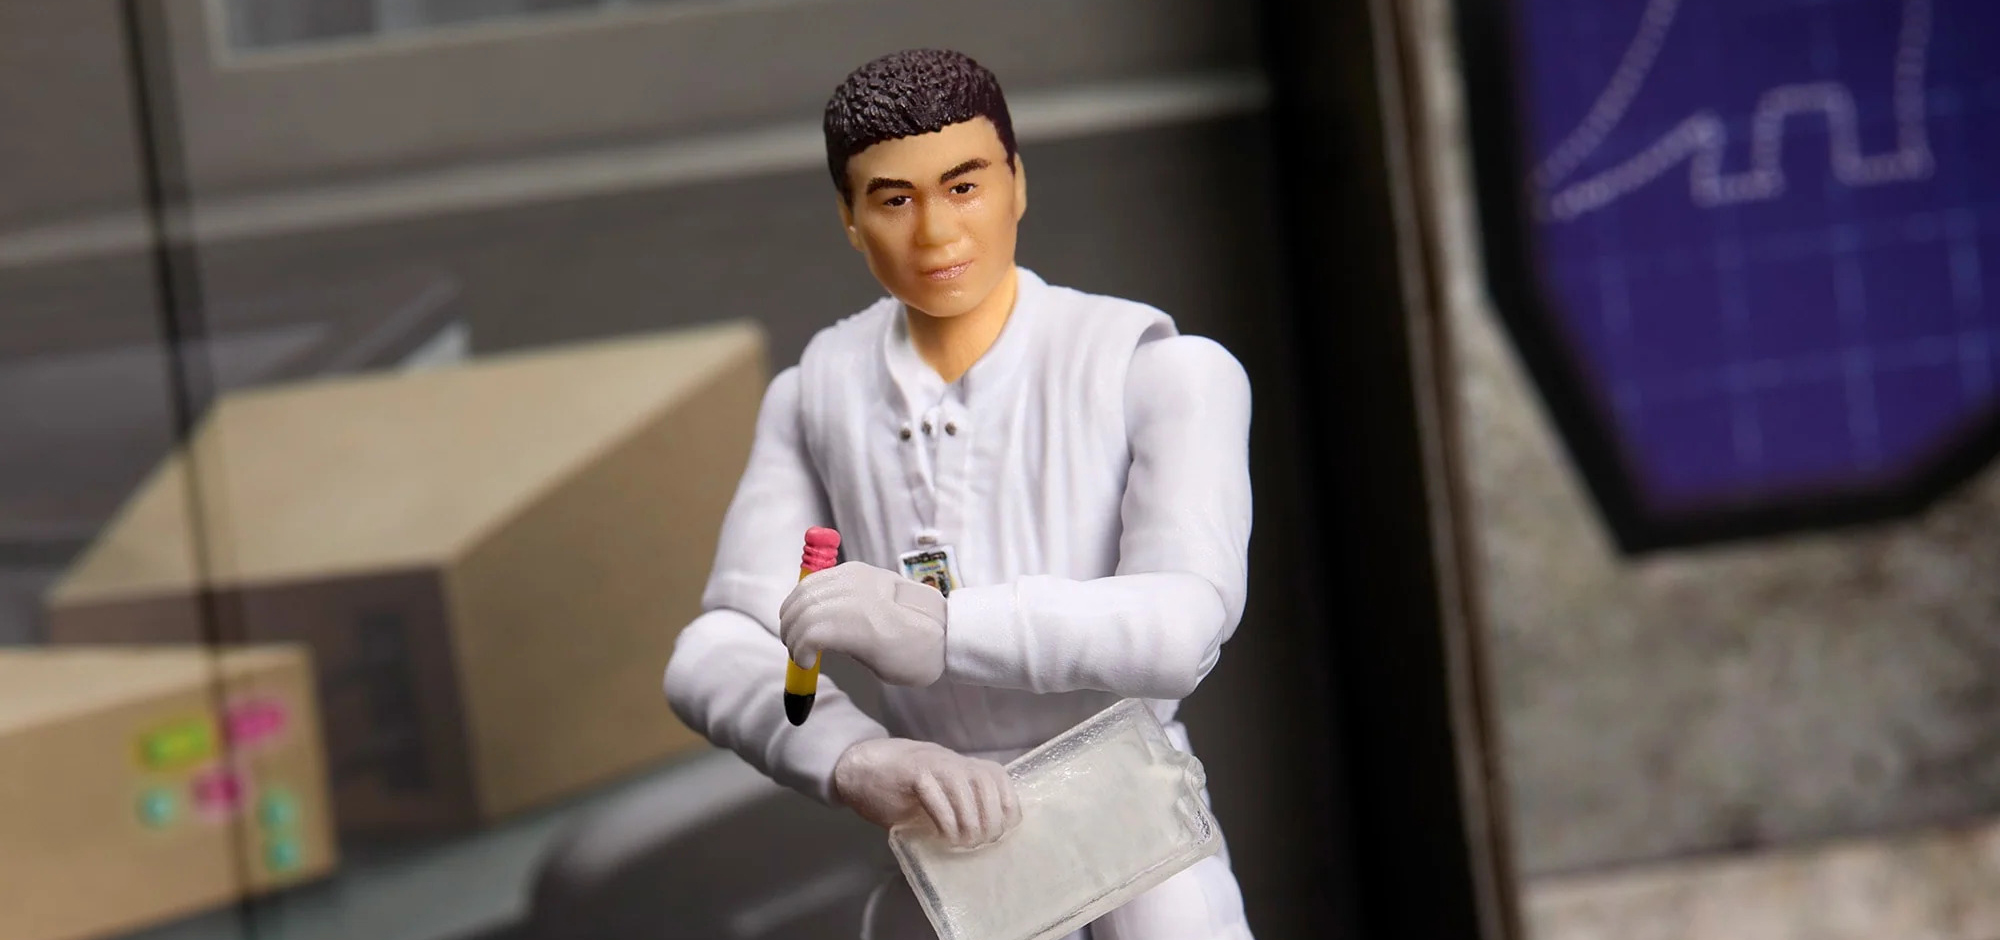 Order the Jurassic Park ‘Lab Tour Dr. Henry Wu’ on Mattel Creations!